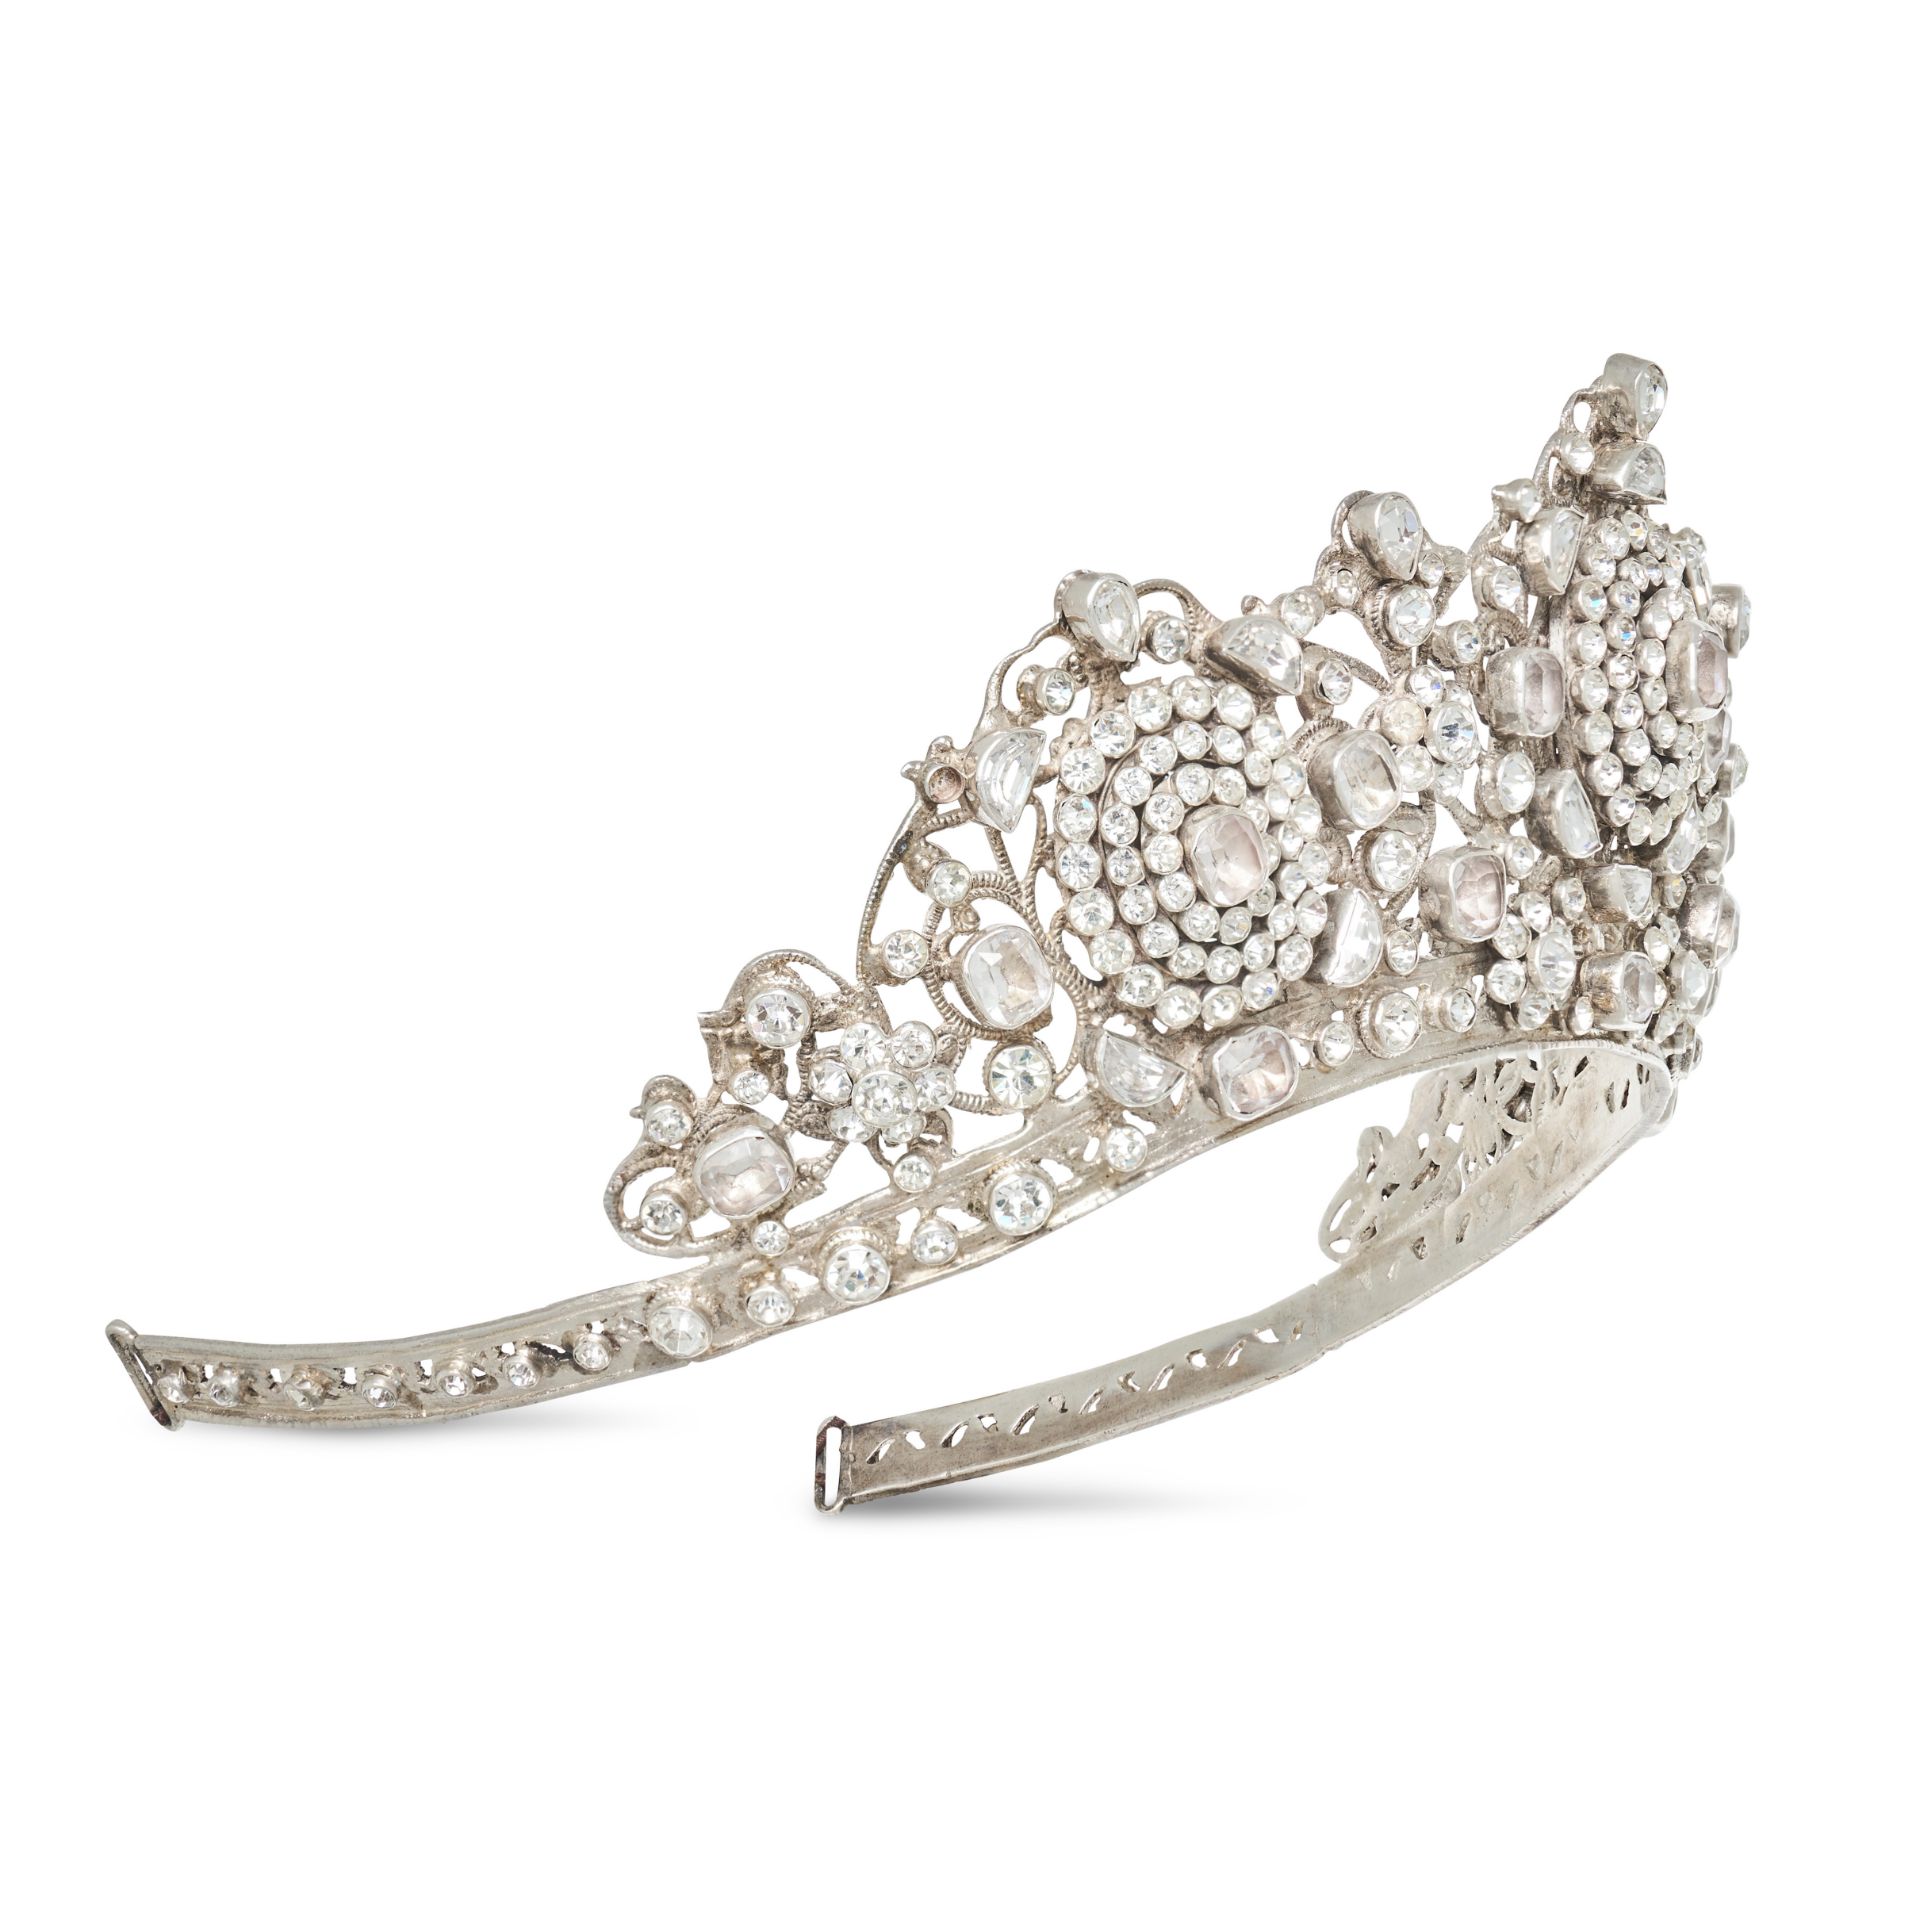 A PASTE TIARA set with clusters of paste stones, accented throughout with round, cushion, and hal... - Image 2 of 2